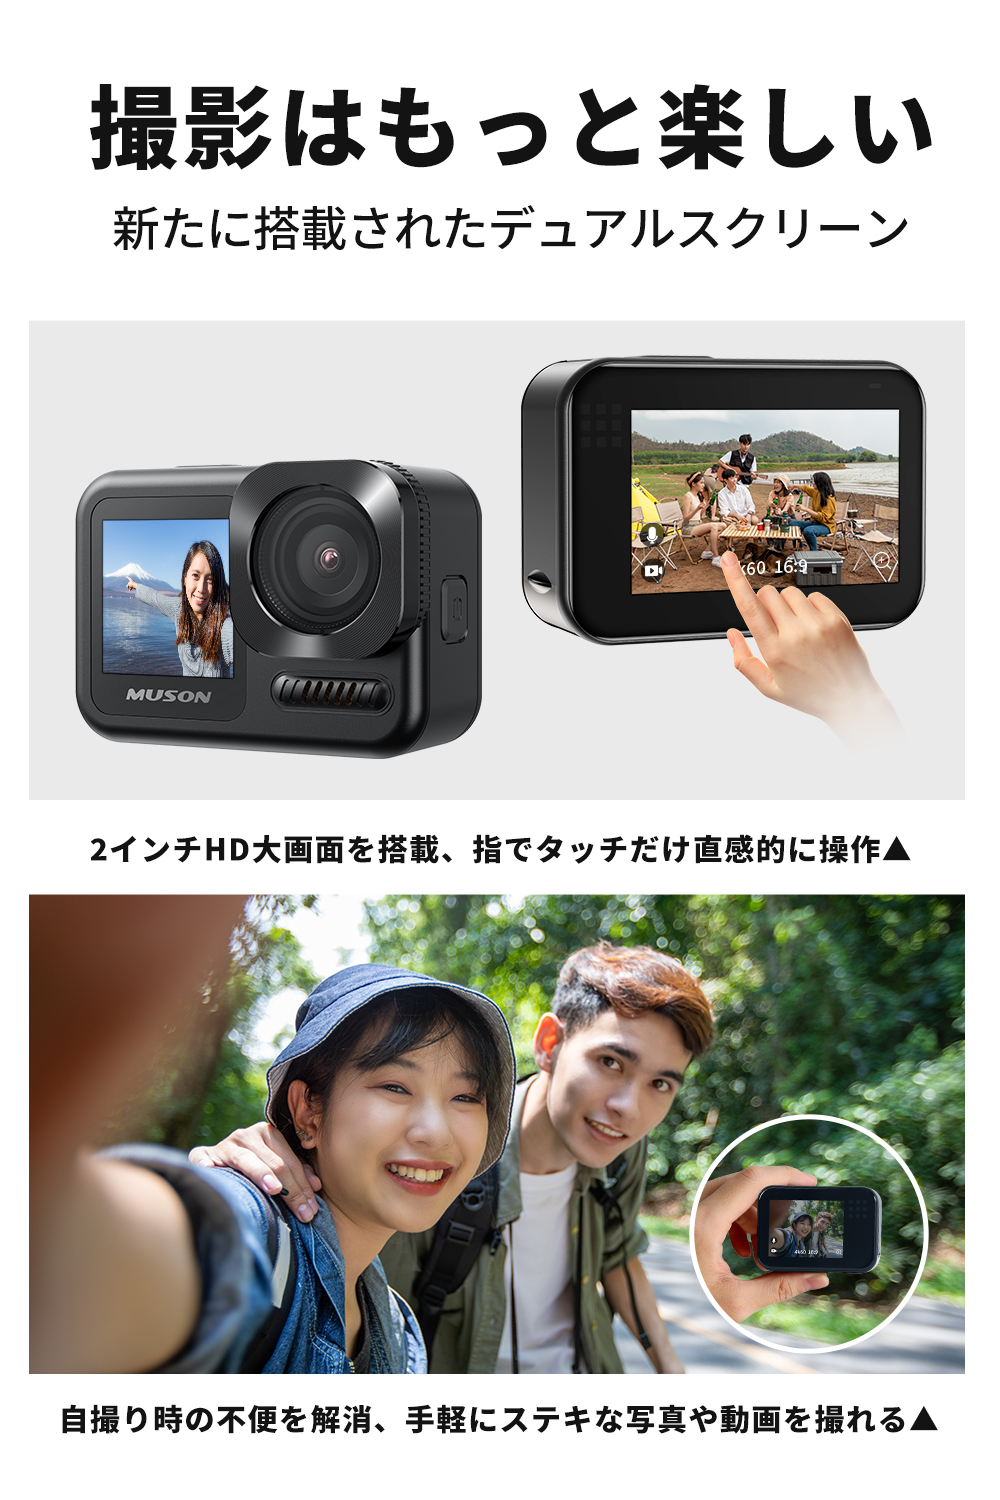  today maximum 25% acquisition Point plus coupon book@ machine waterproof 20M action camera -4Kwifi installing 170 times wide-angle lens remote control attaching Musonultra2 2000 ten thousand pixels underwater camera blurring correction 